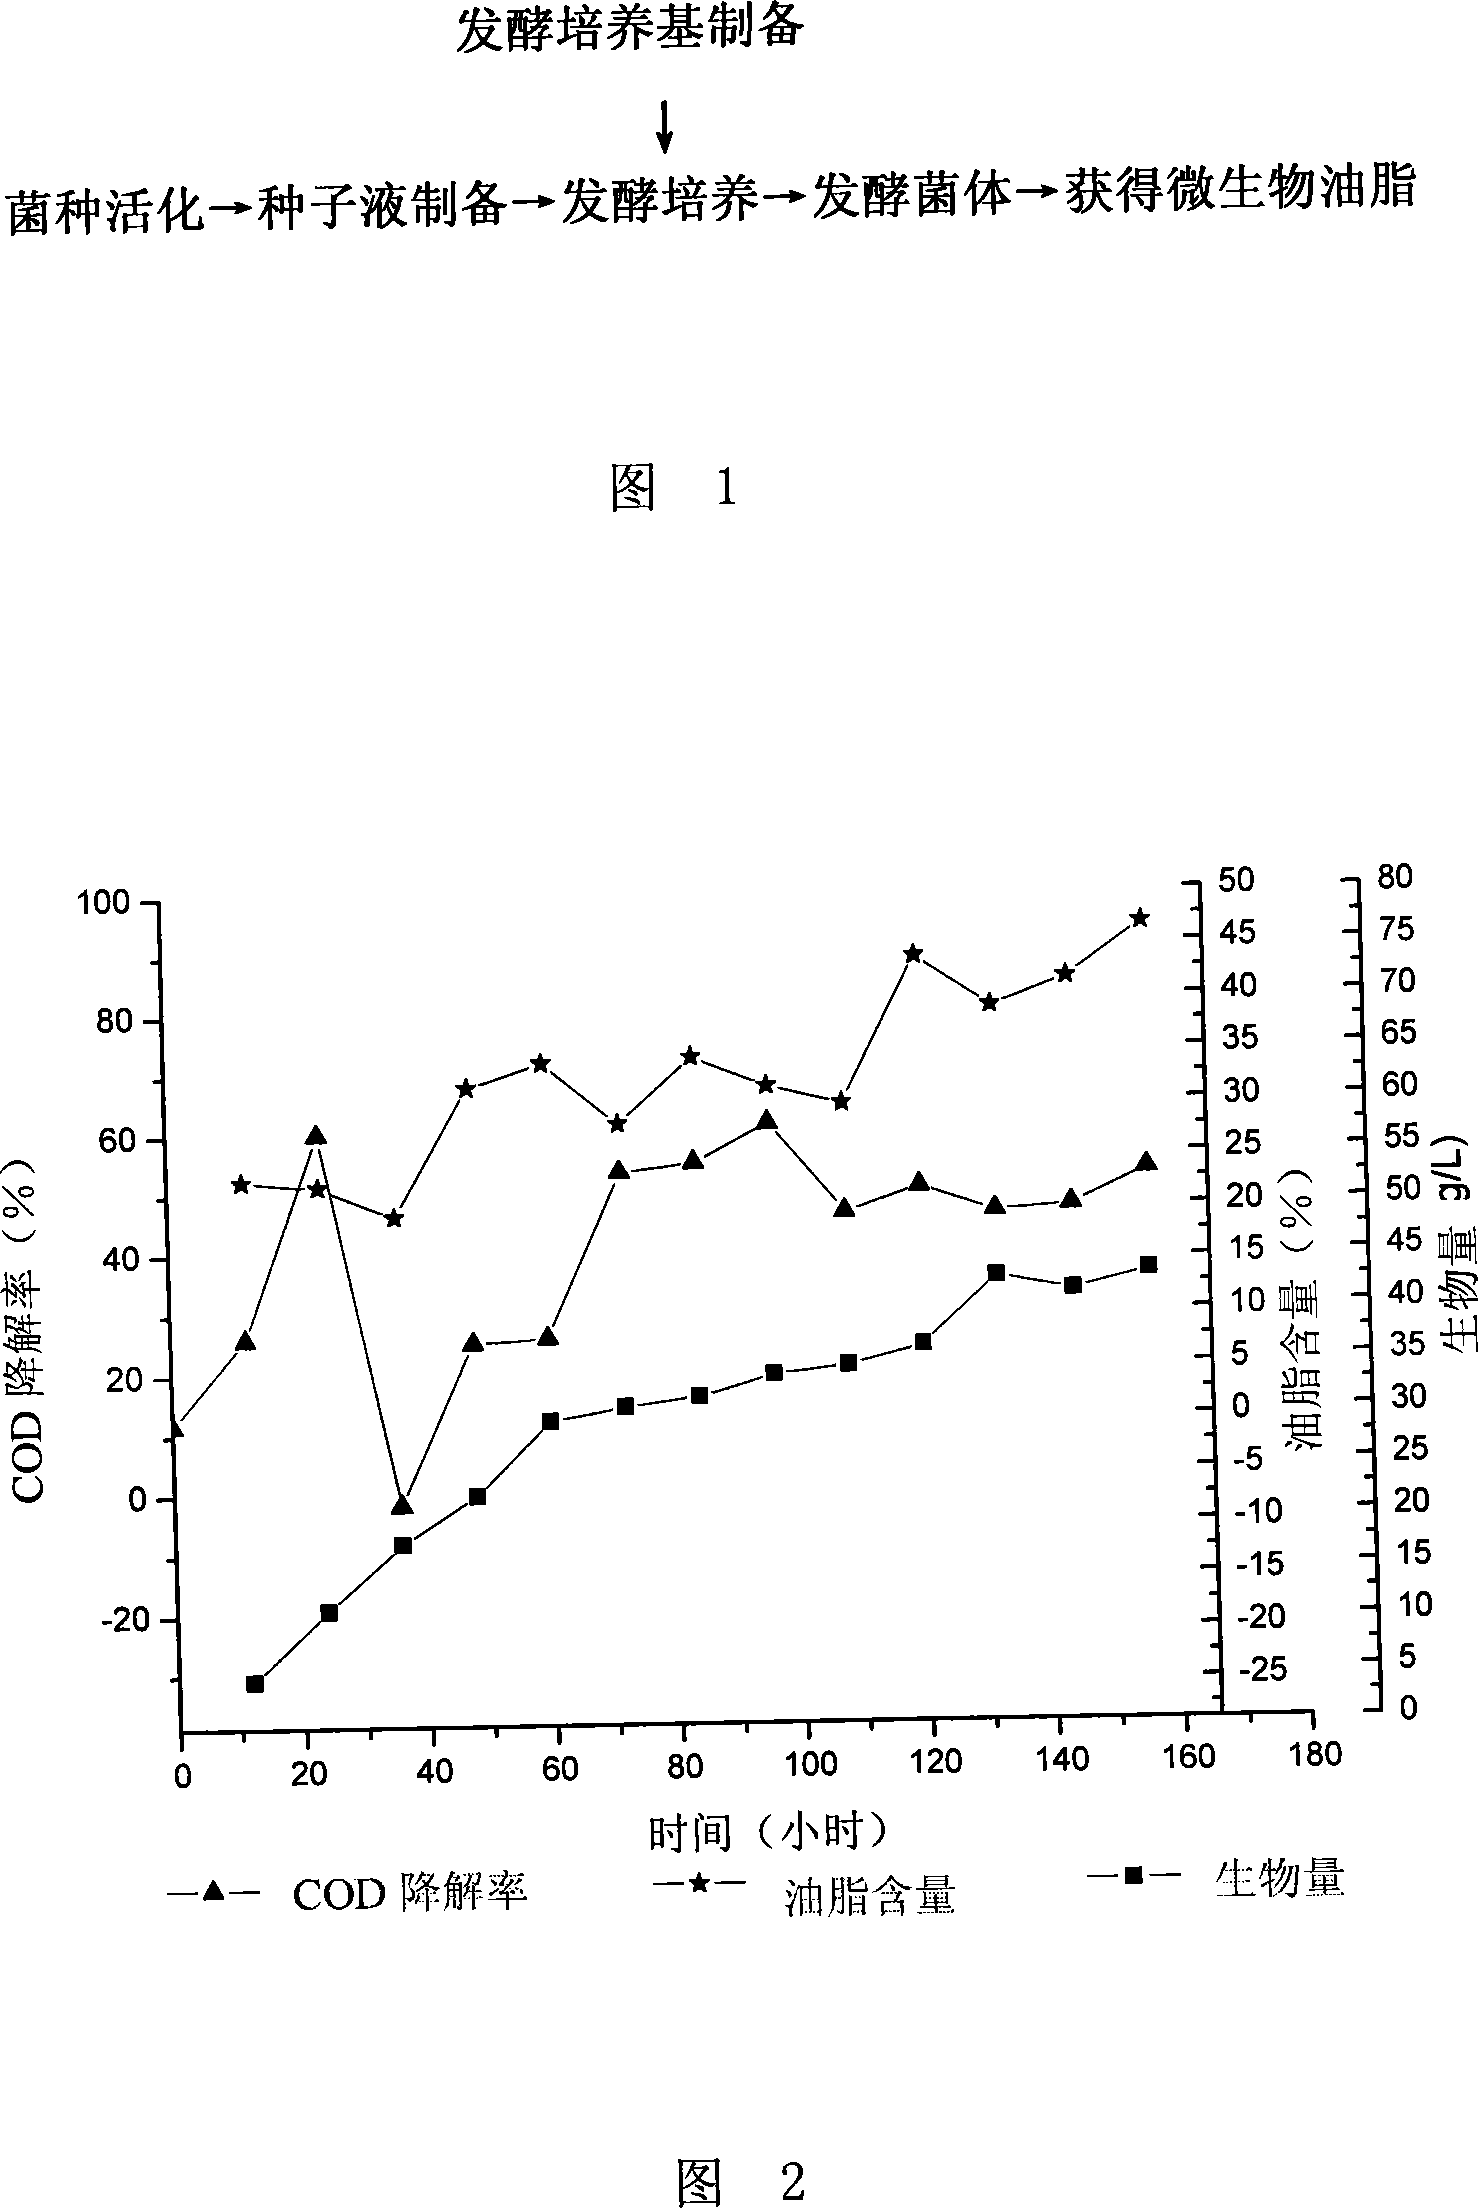 Method for treating industrial waste and fermentation production of microbial oil by microorganism as well as special strain thereof